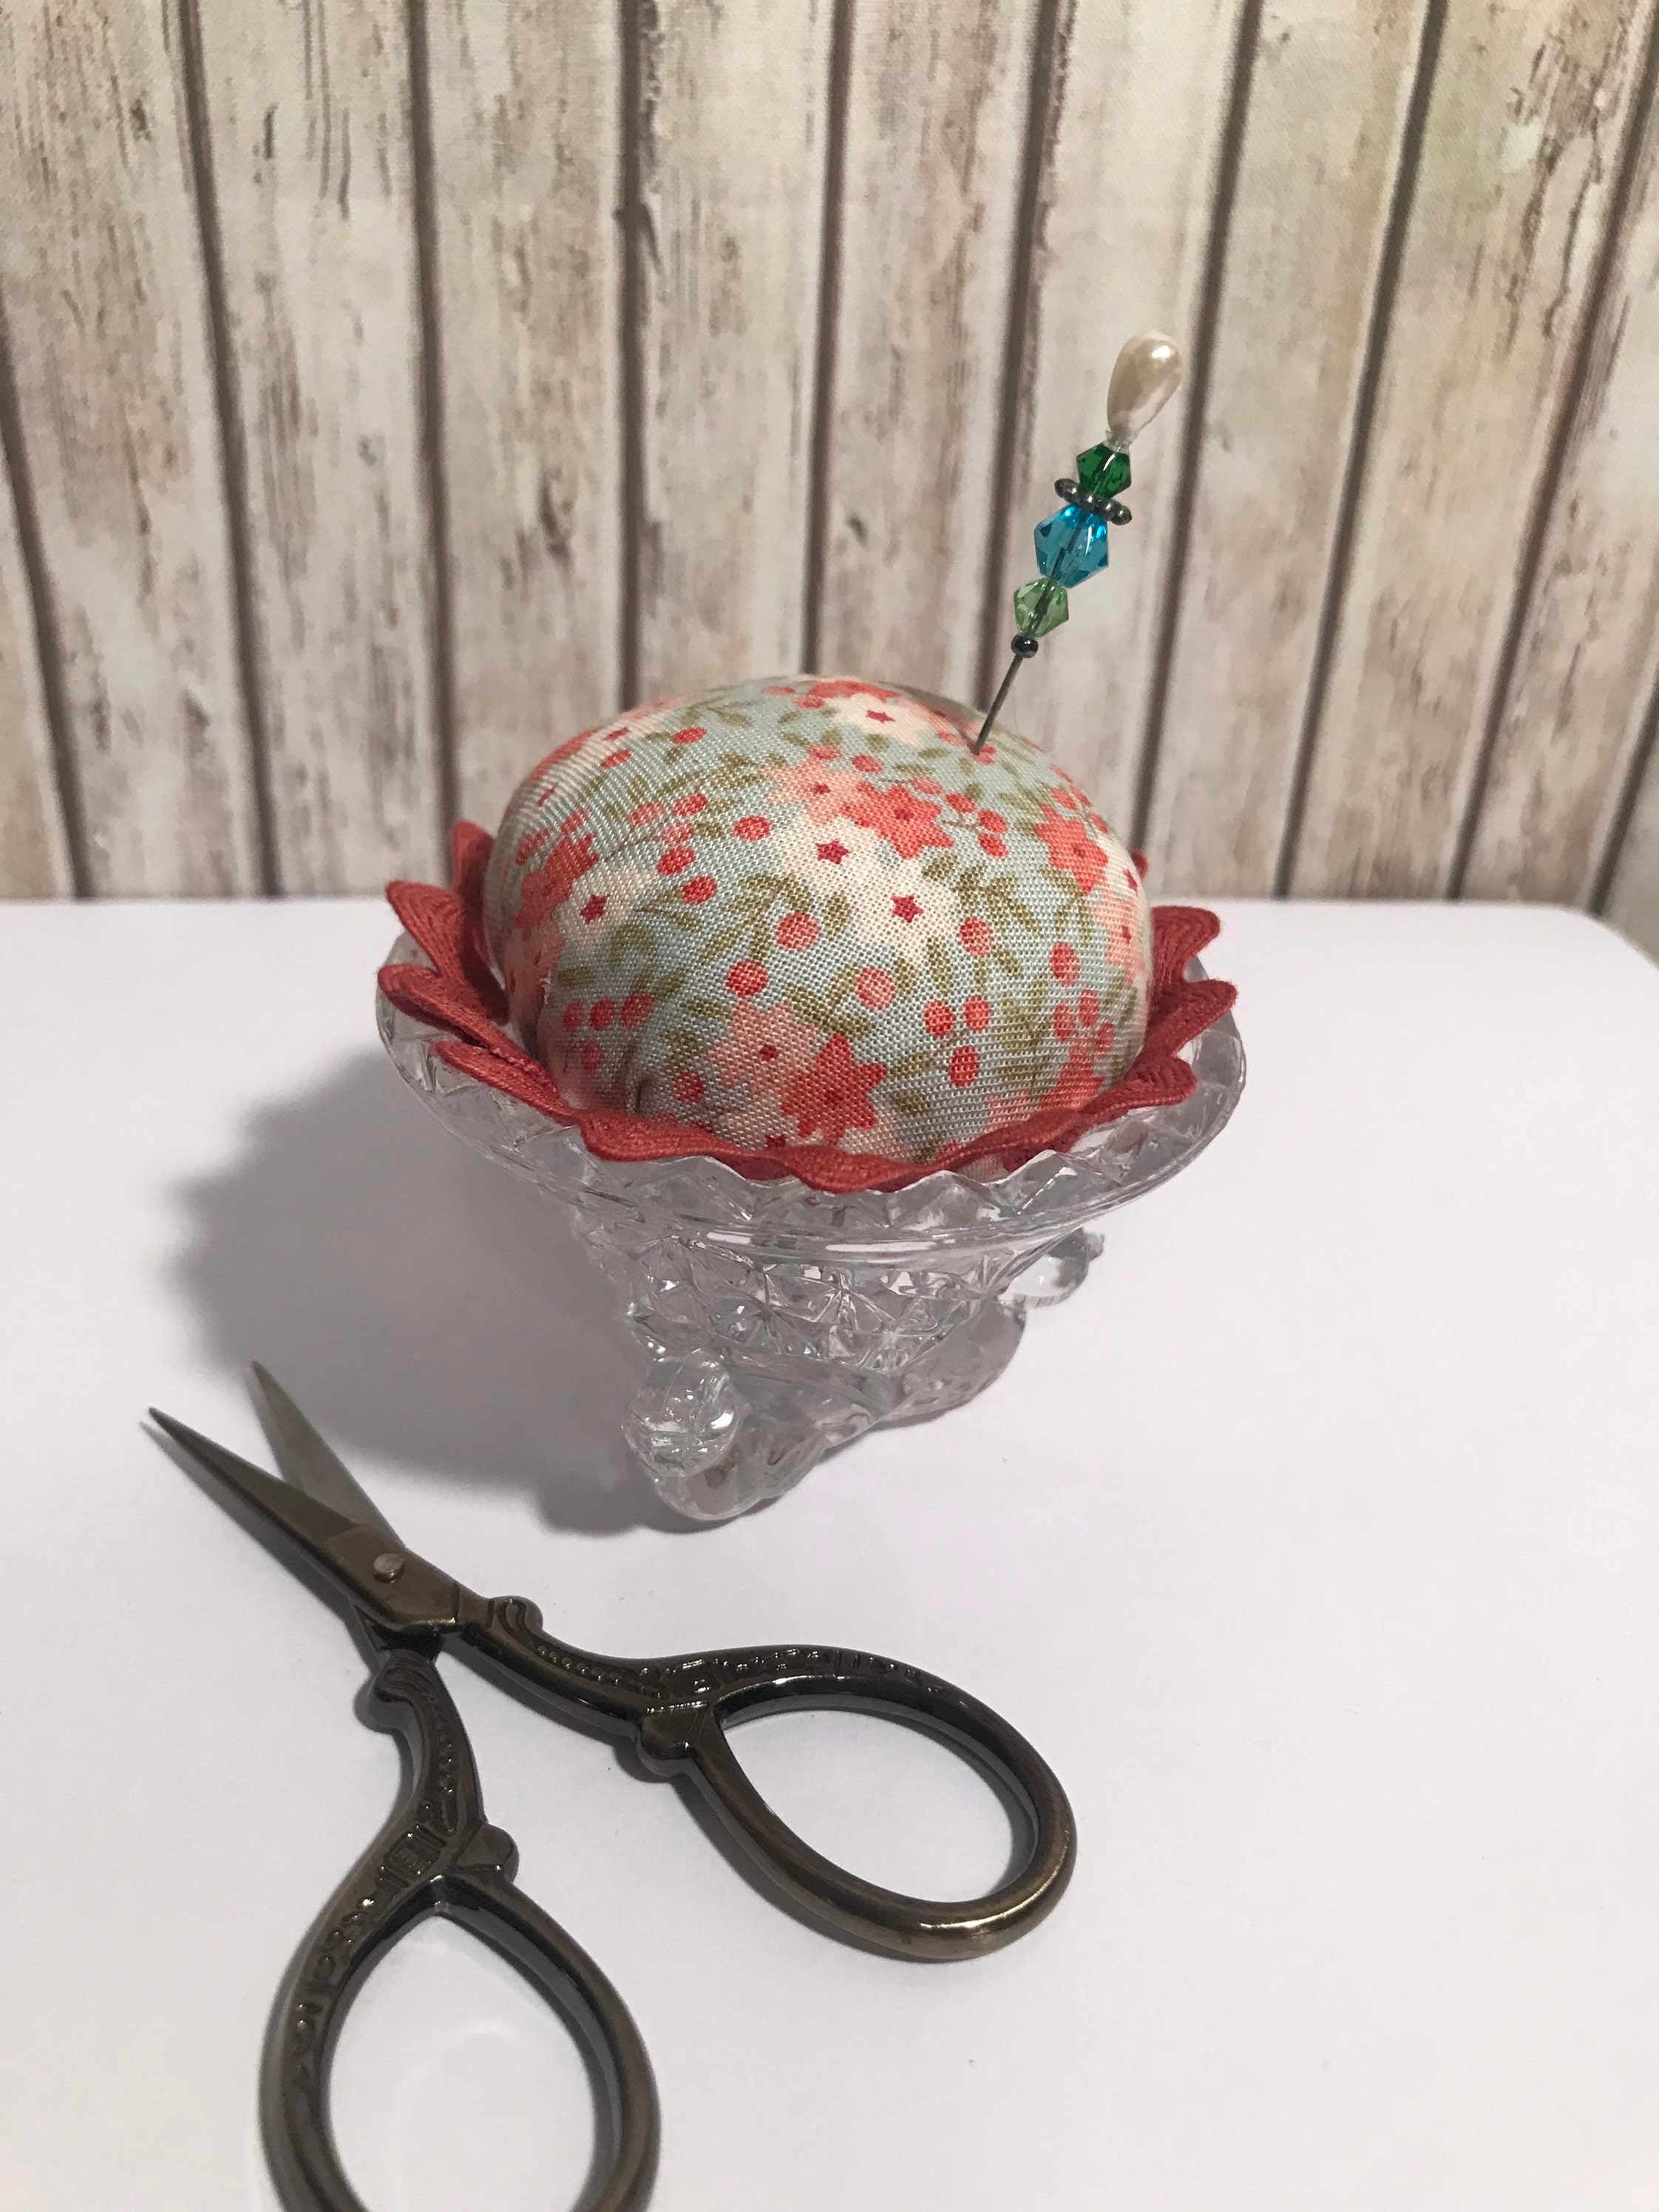 Salt Cellar Pin Cushion, Unique Pin Cushion, Craft Room Decor, Sewing Pin  Cushion, Sewing Gift for Mom, Unique Gifts for Quilters 